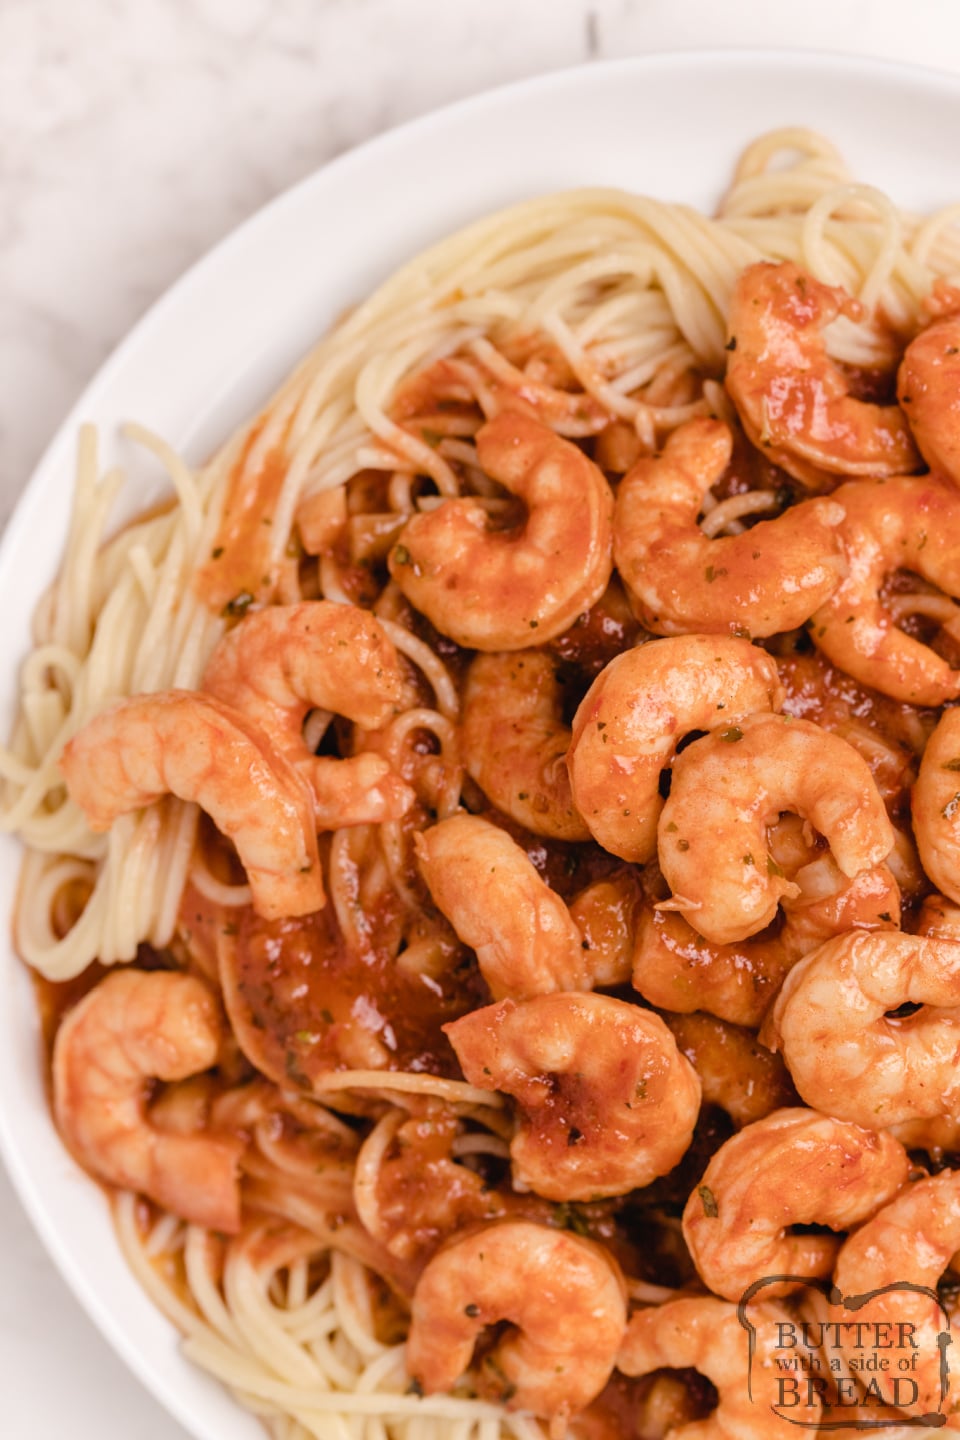 Fresh shrimp in a buttery scampi sauce over pasta